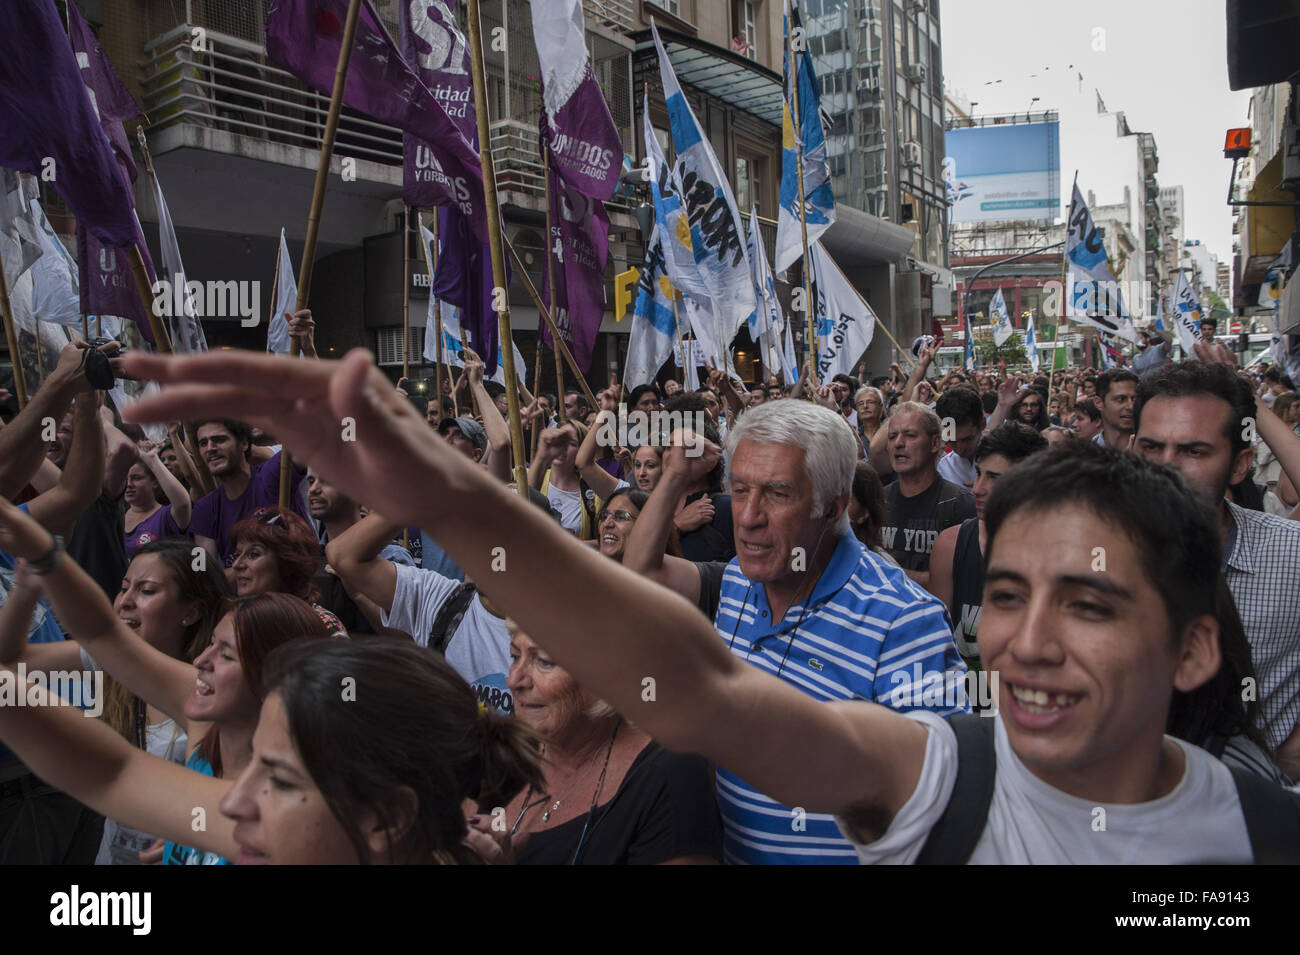 Buenos Aires, Argentina. 23rd Dec, 2015. Supporters of Director MartÃn Sabatella gather outside the building of AFSCA media watchdog after President Mauricio Macri's government announced a decree to take over control. President Macri appointed Agustin Garzon, a man of his own party as Director, but Sabatella, designated by ex-President Cristina Fernandez de Kirchner, refuses to resign arguing that AFSCA is autonomous by law, and his mandate ends in 2017 and can't be revoked by decree. Credit:  Patricio Murphy/ZUMA Wire/Alamy Live News Stock Photo